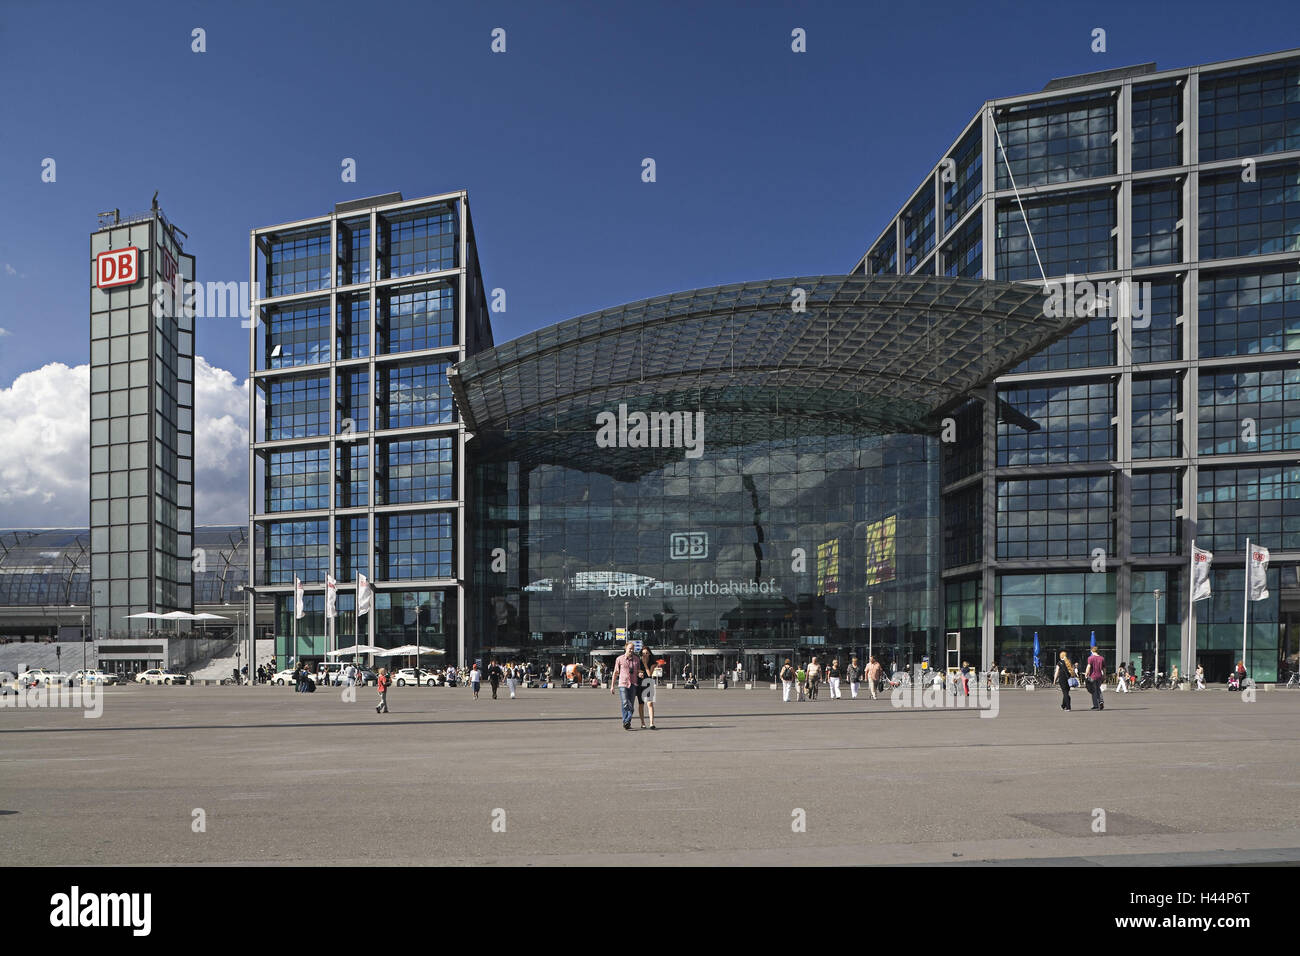 Germany, Berlin, central station, passer-by, no property release, no model release, Europe, town, capital, building, architecture, railway station, German Railways, traffic, transport, outside, glass front, station building, person, tourism, pedestrian, r Stock Photo